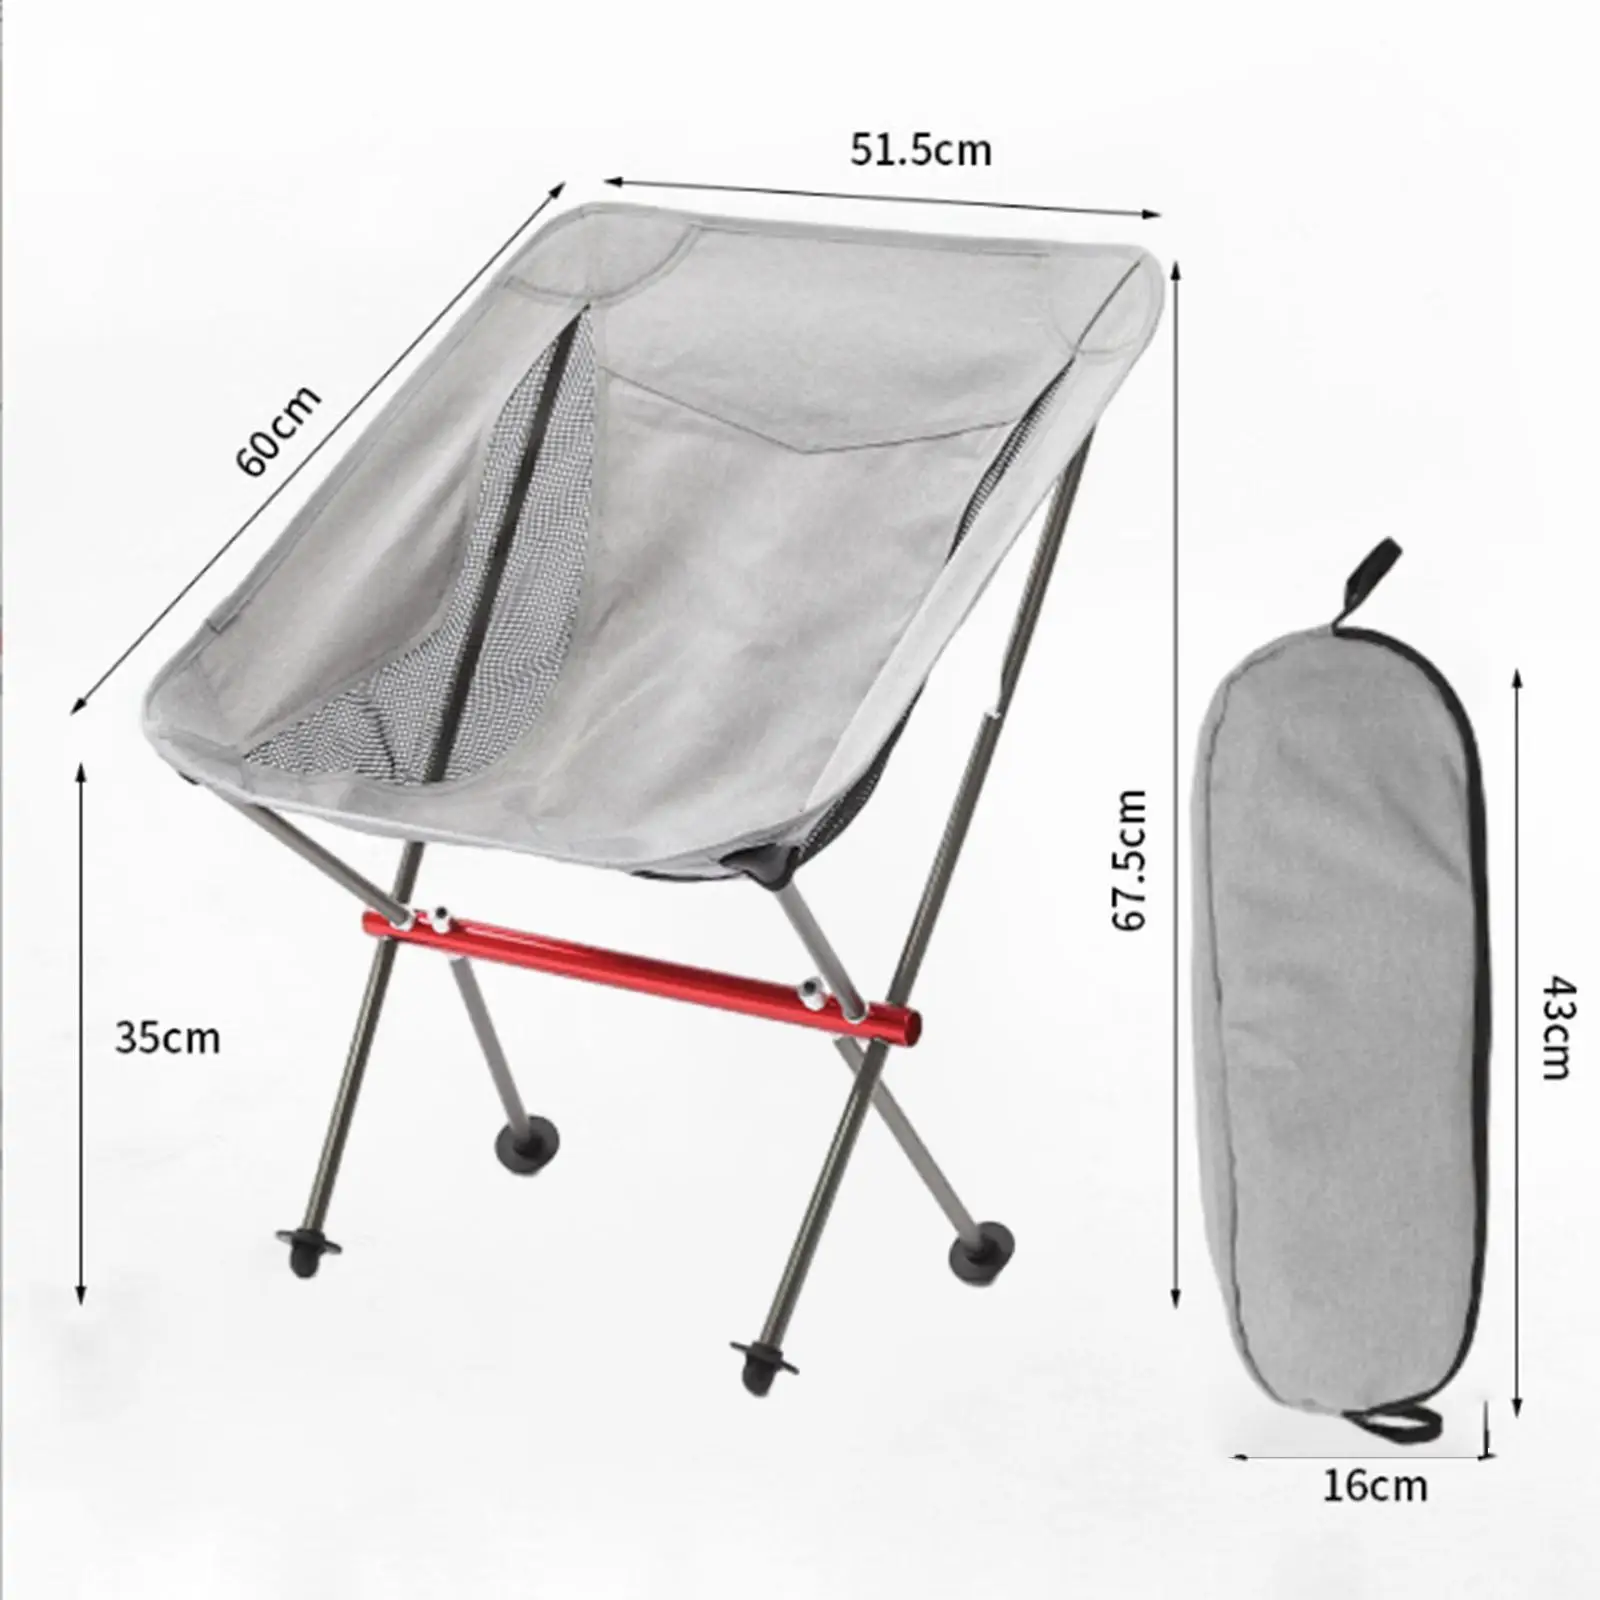 Folding Camping Chair Outdoor Moon Chair Lightweight Practical Folding Chair Beach Chair for Fishing Barbecue Backyard Hiking